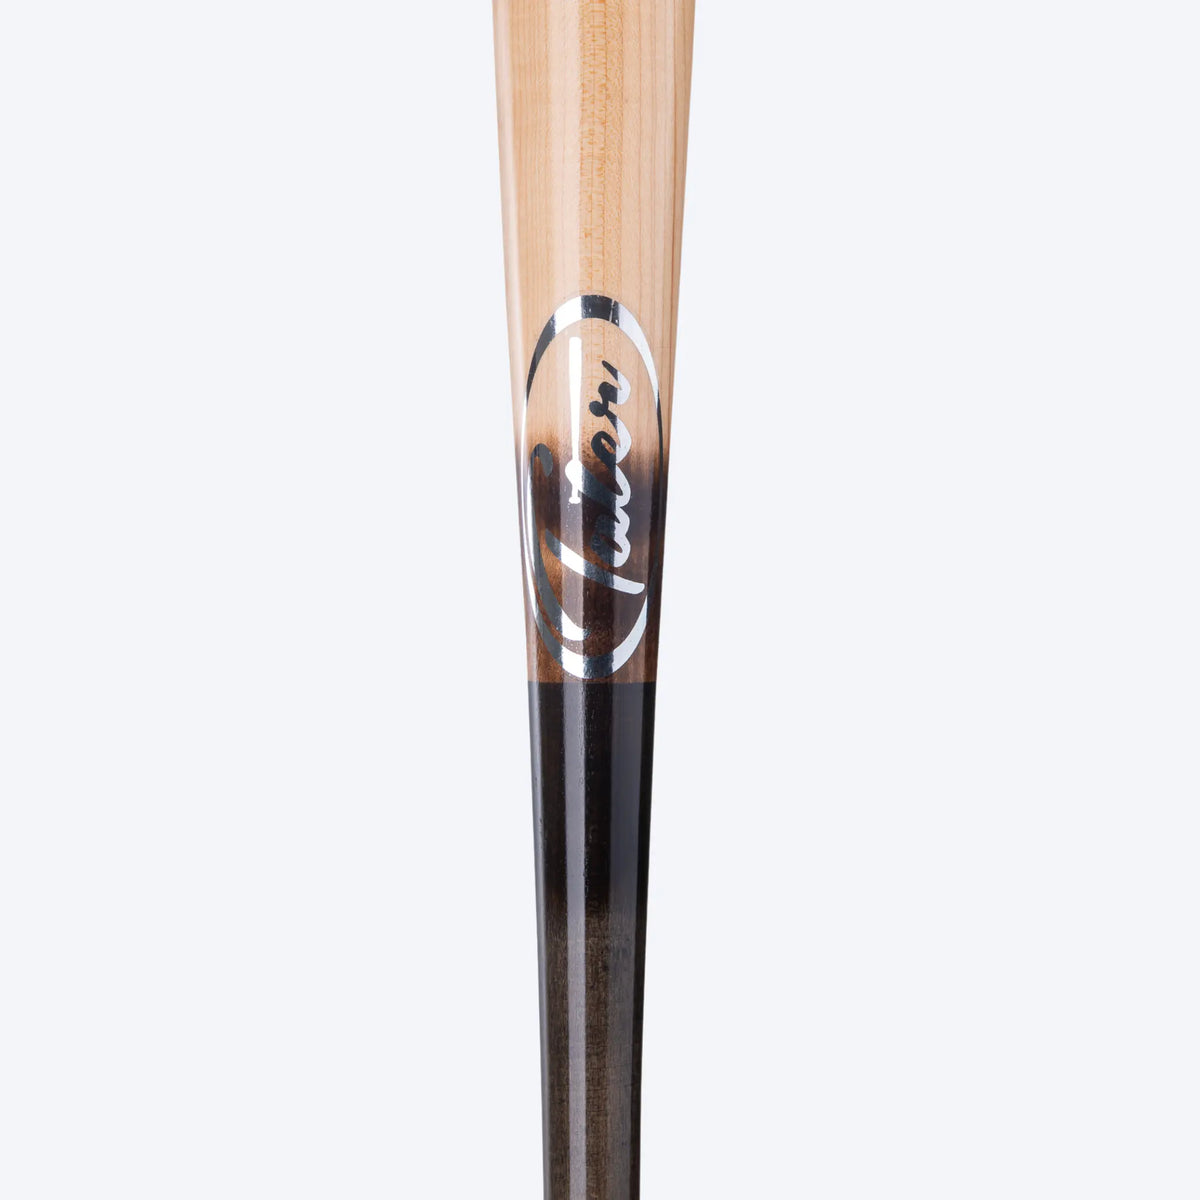 A close-up of the Tater X4 Pro Maple bat&#39;s middle, where the natural wood transitions to the black handle. The crisp detail of the wood grain and the clear Tater logo highlight the bat&#39;s high quality, favored by high school players.